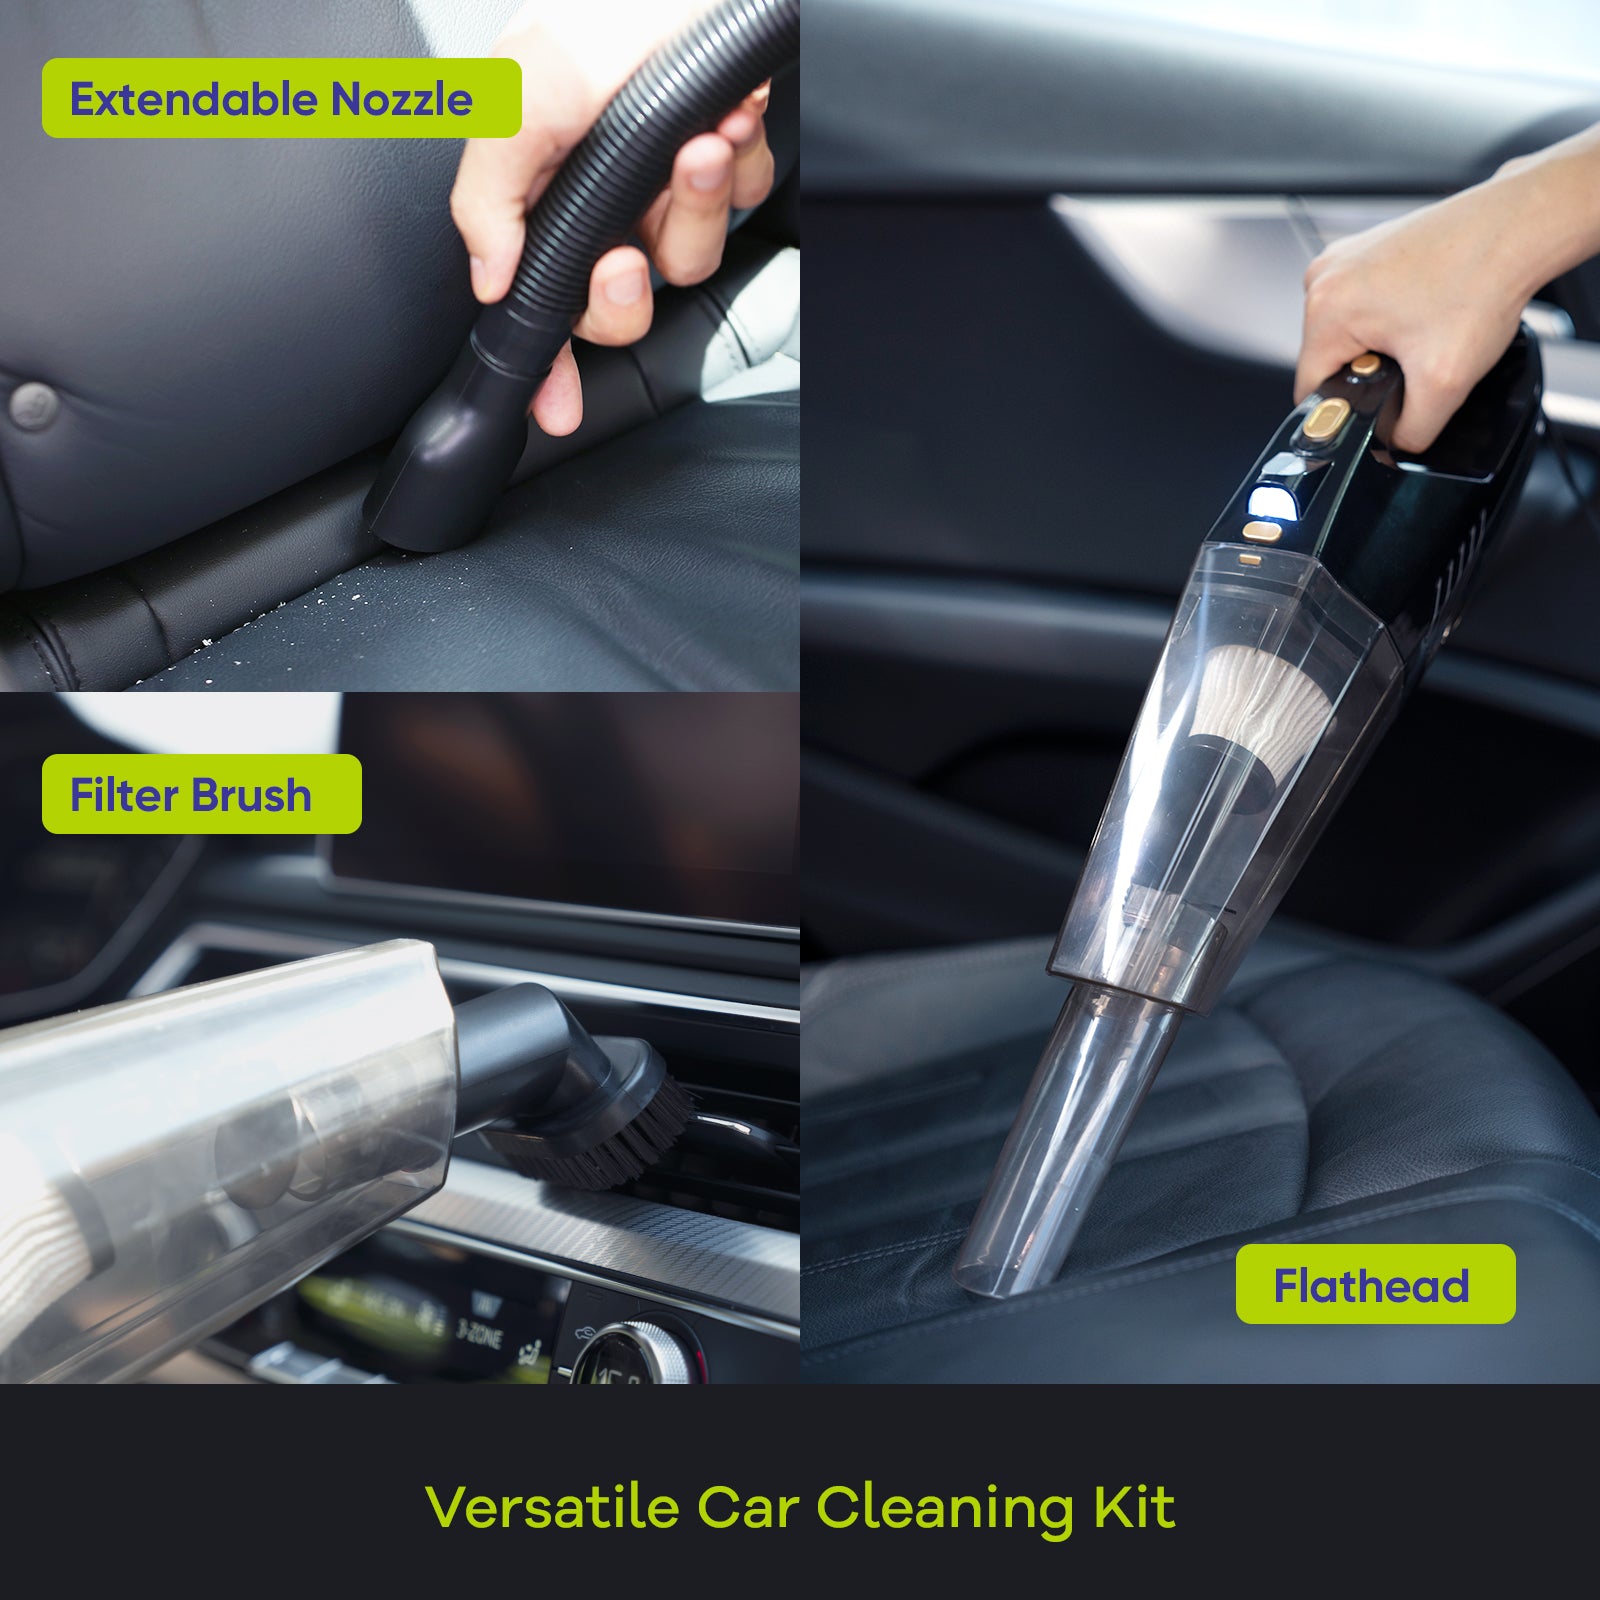 Best Car Vacuum Cleaner, Car Cleaning Tips